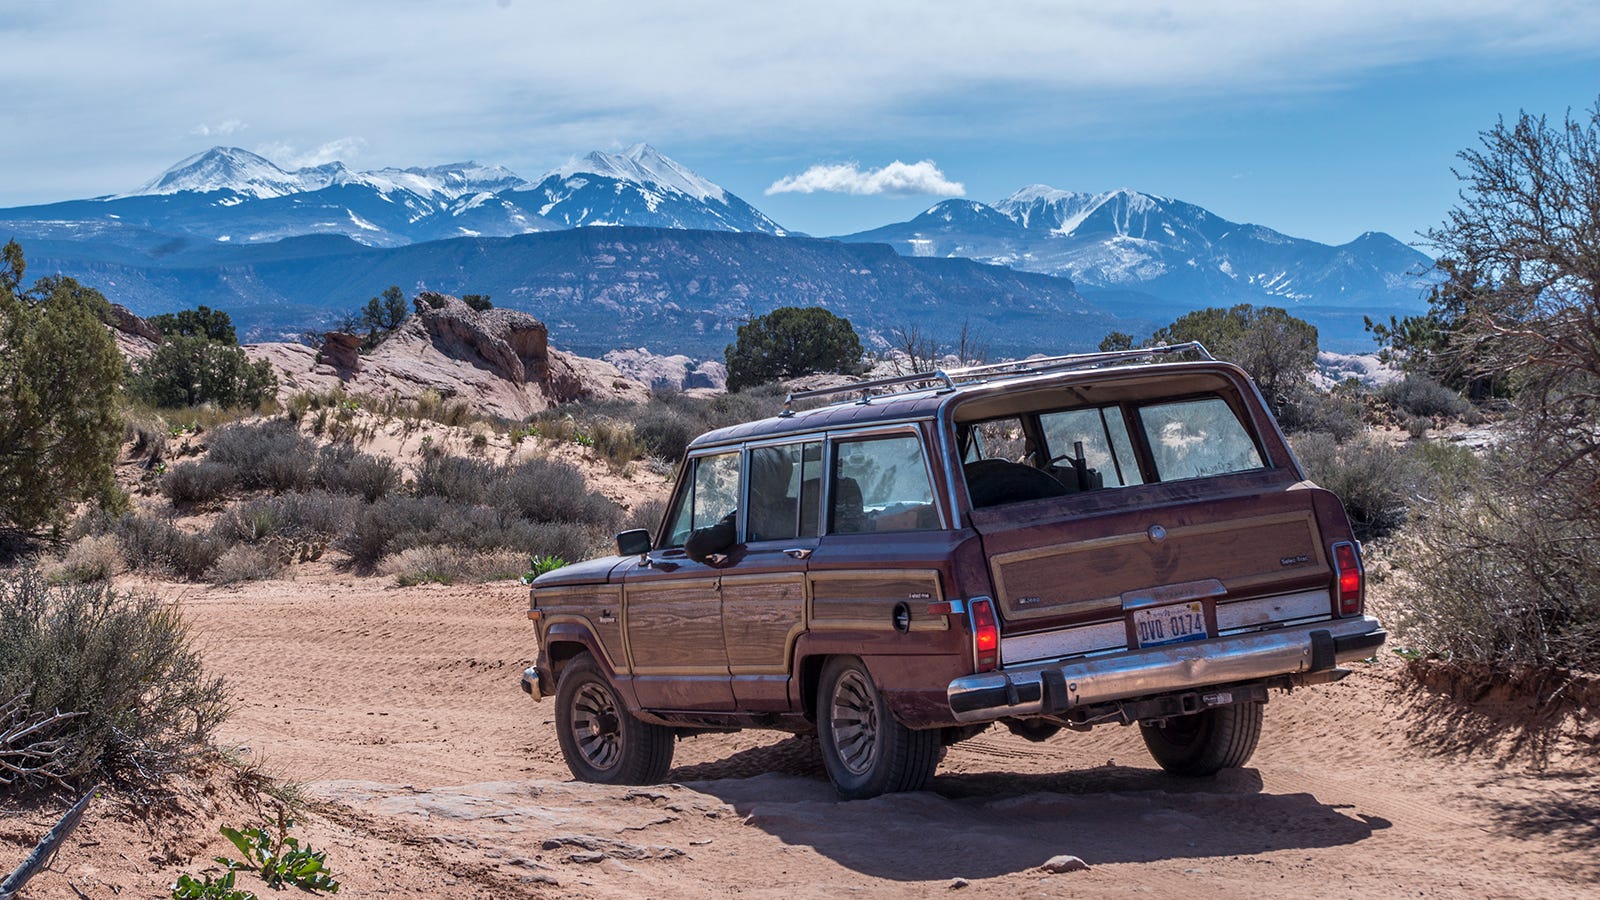 My $800 Jeep Grand Wagoneer Surprised Me On The Off-Road Trails Of Moab